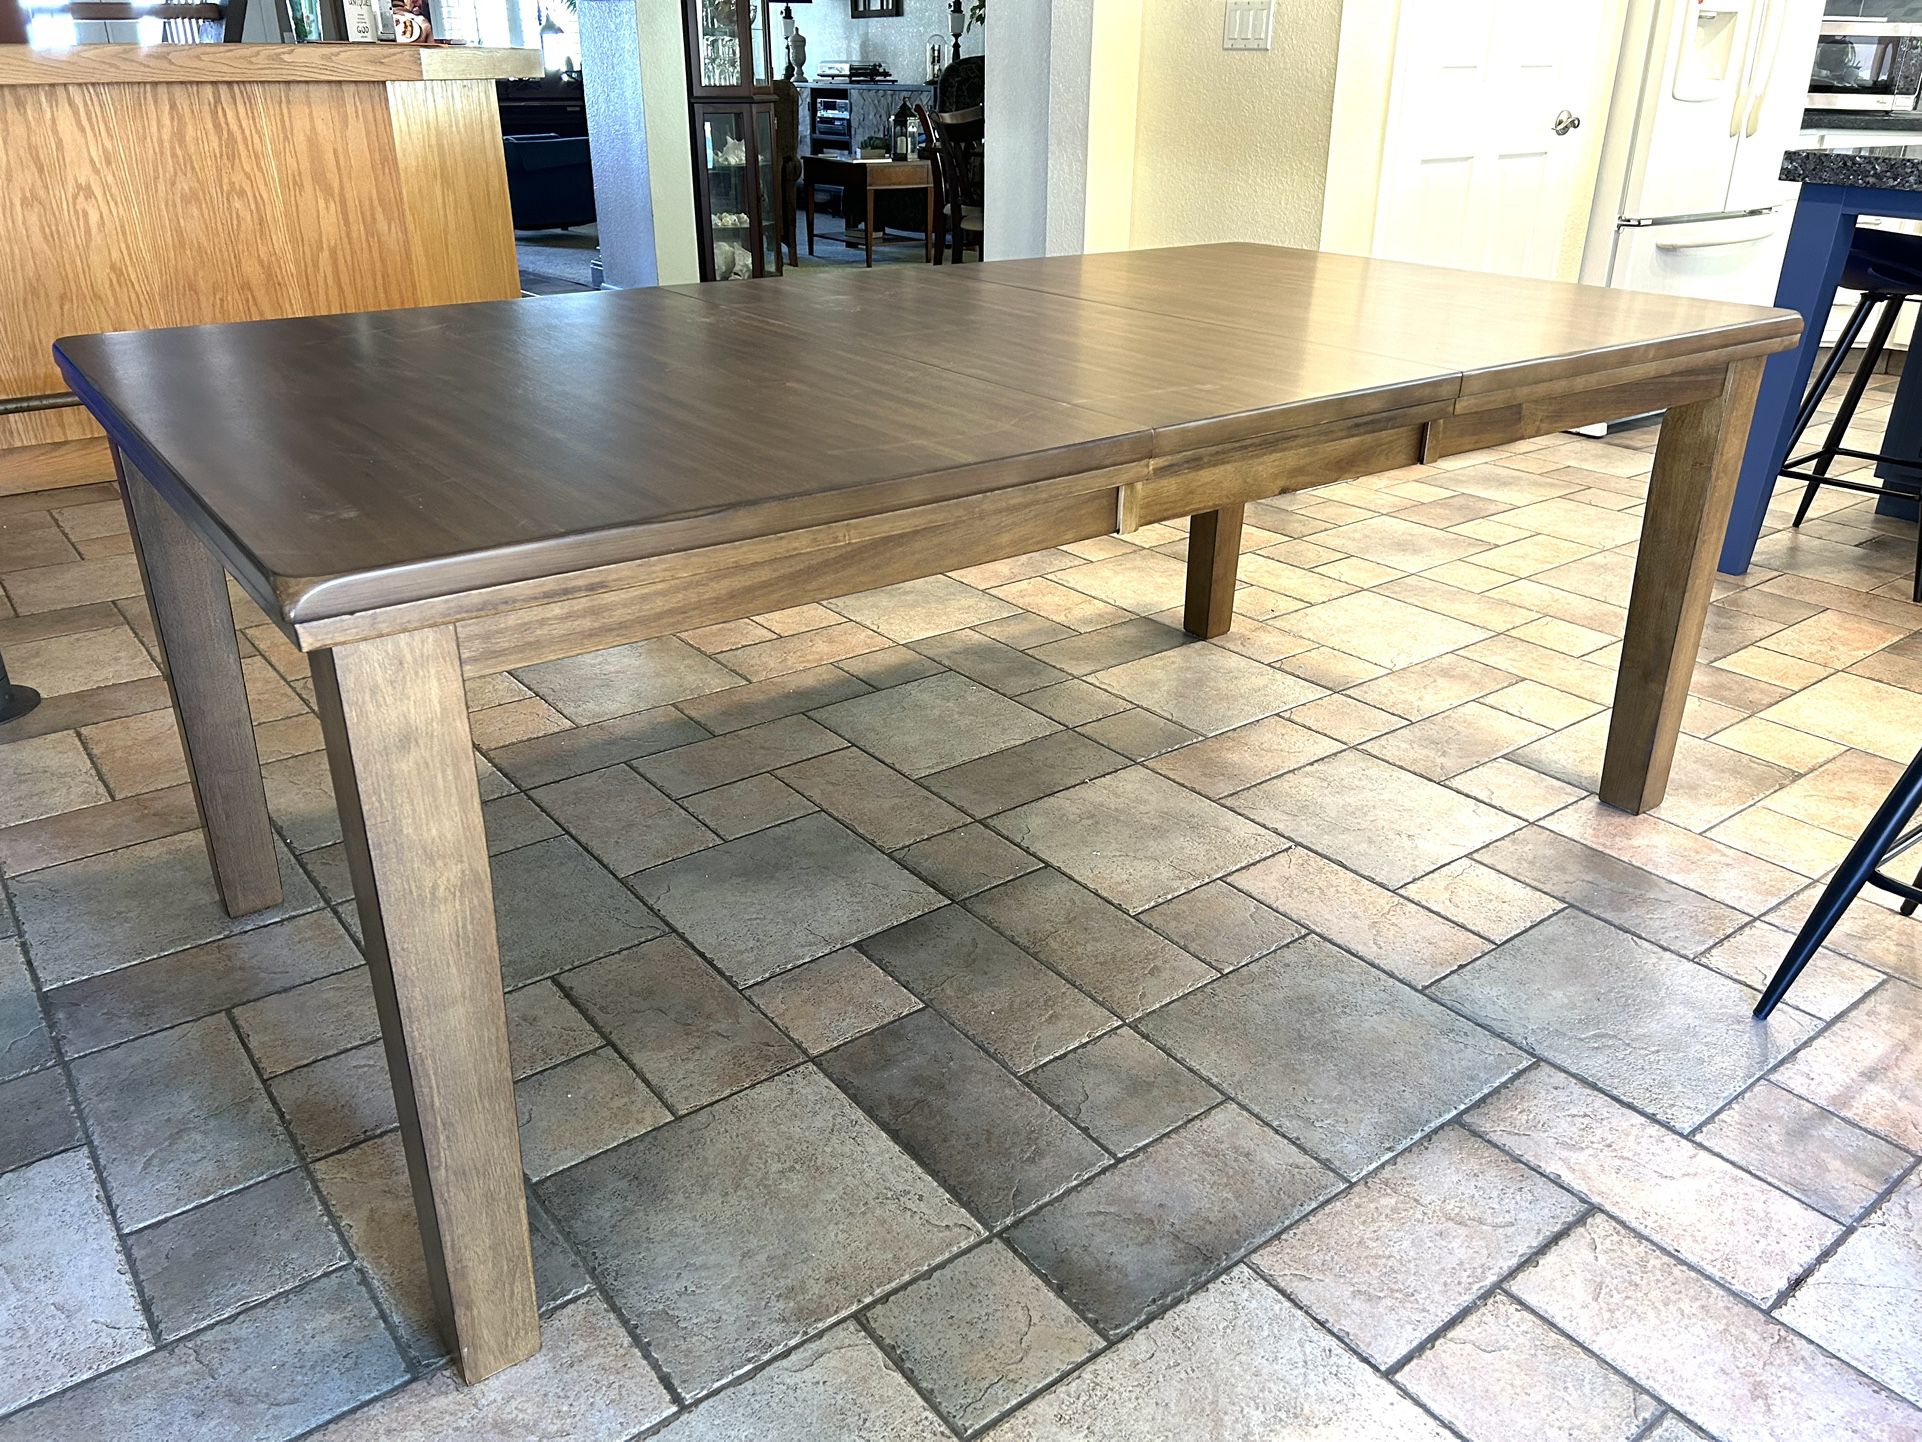 Brand New Table - Never Used 